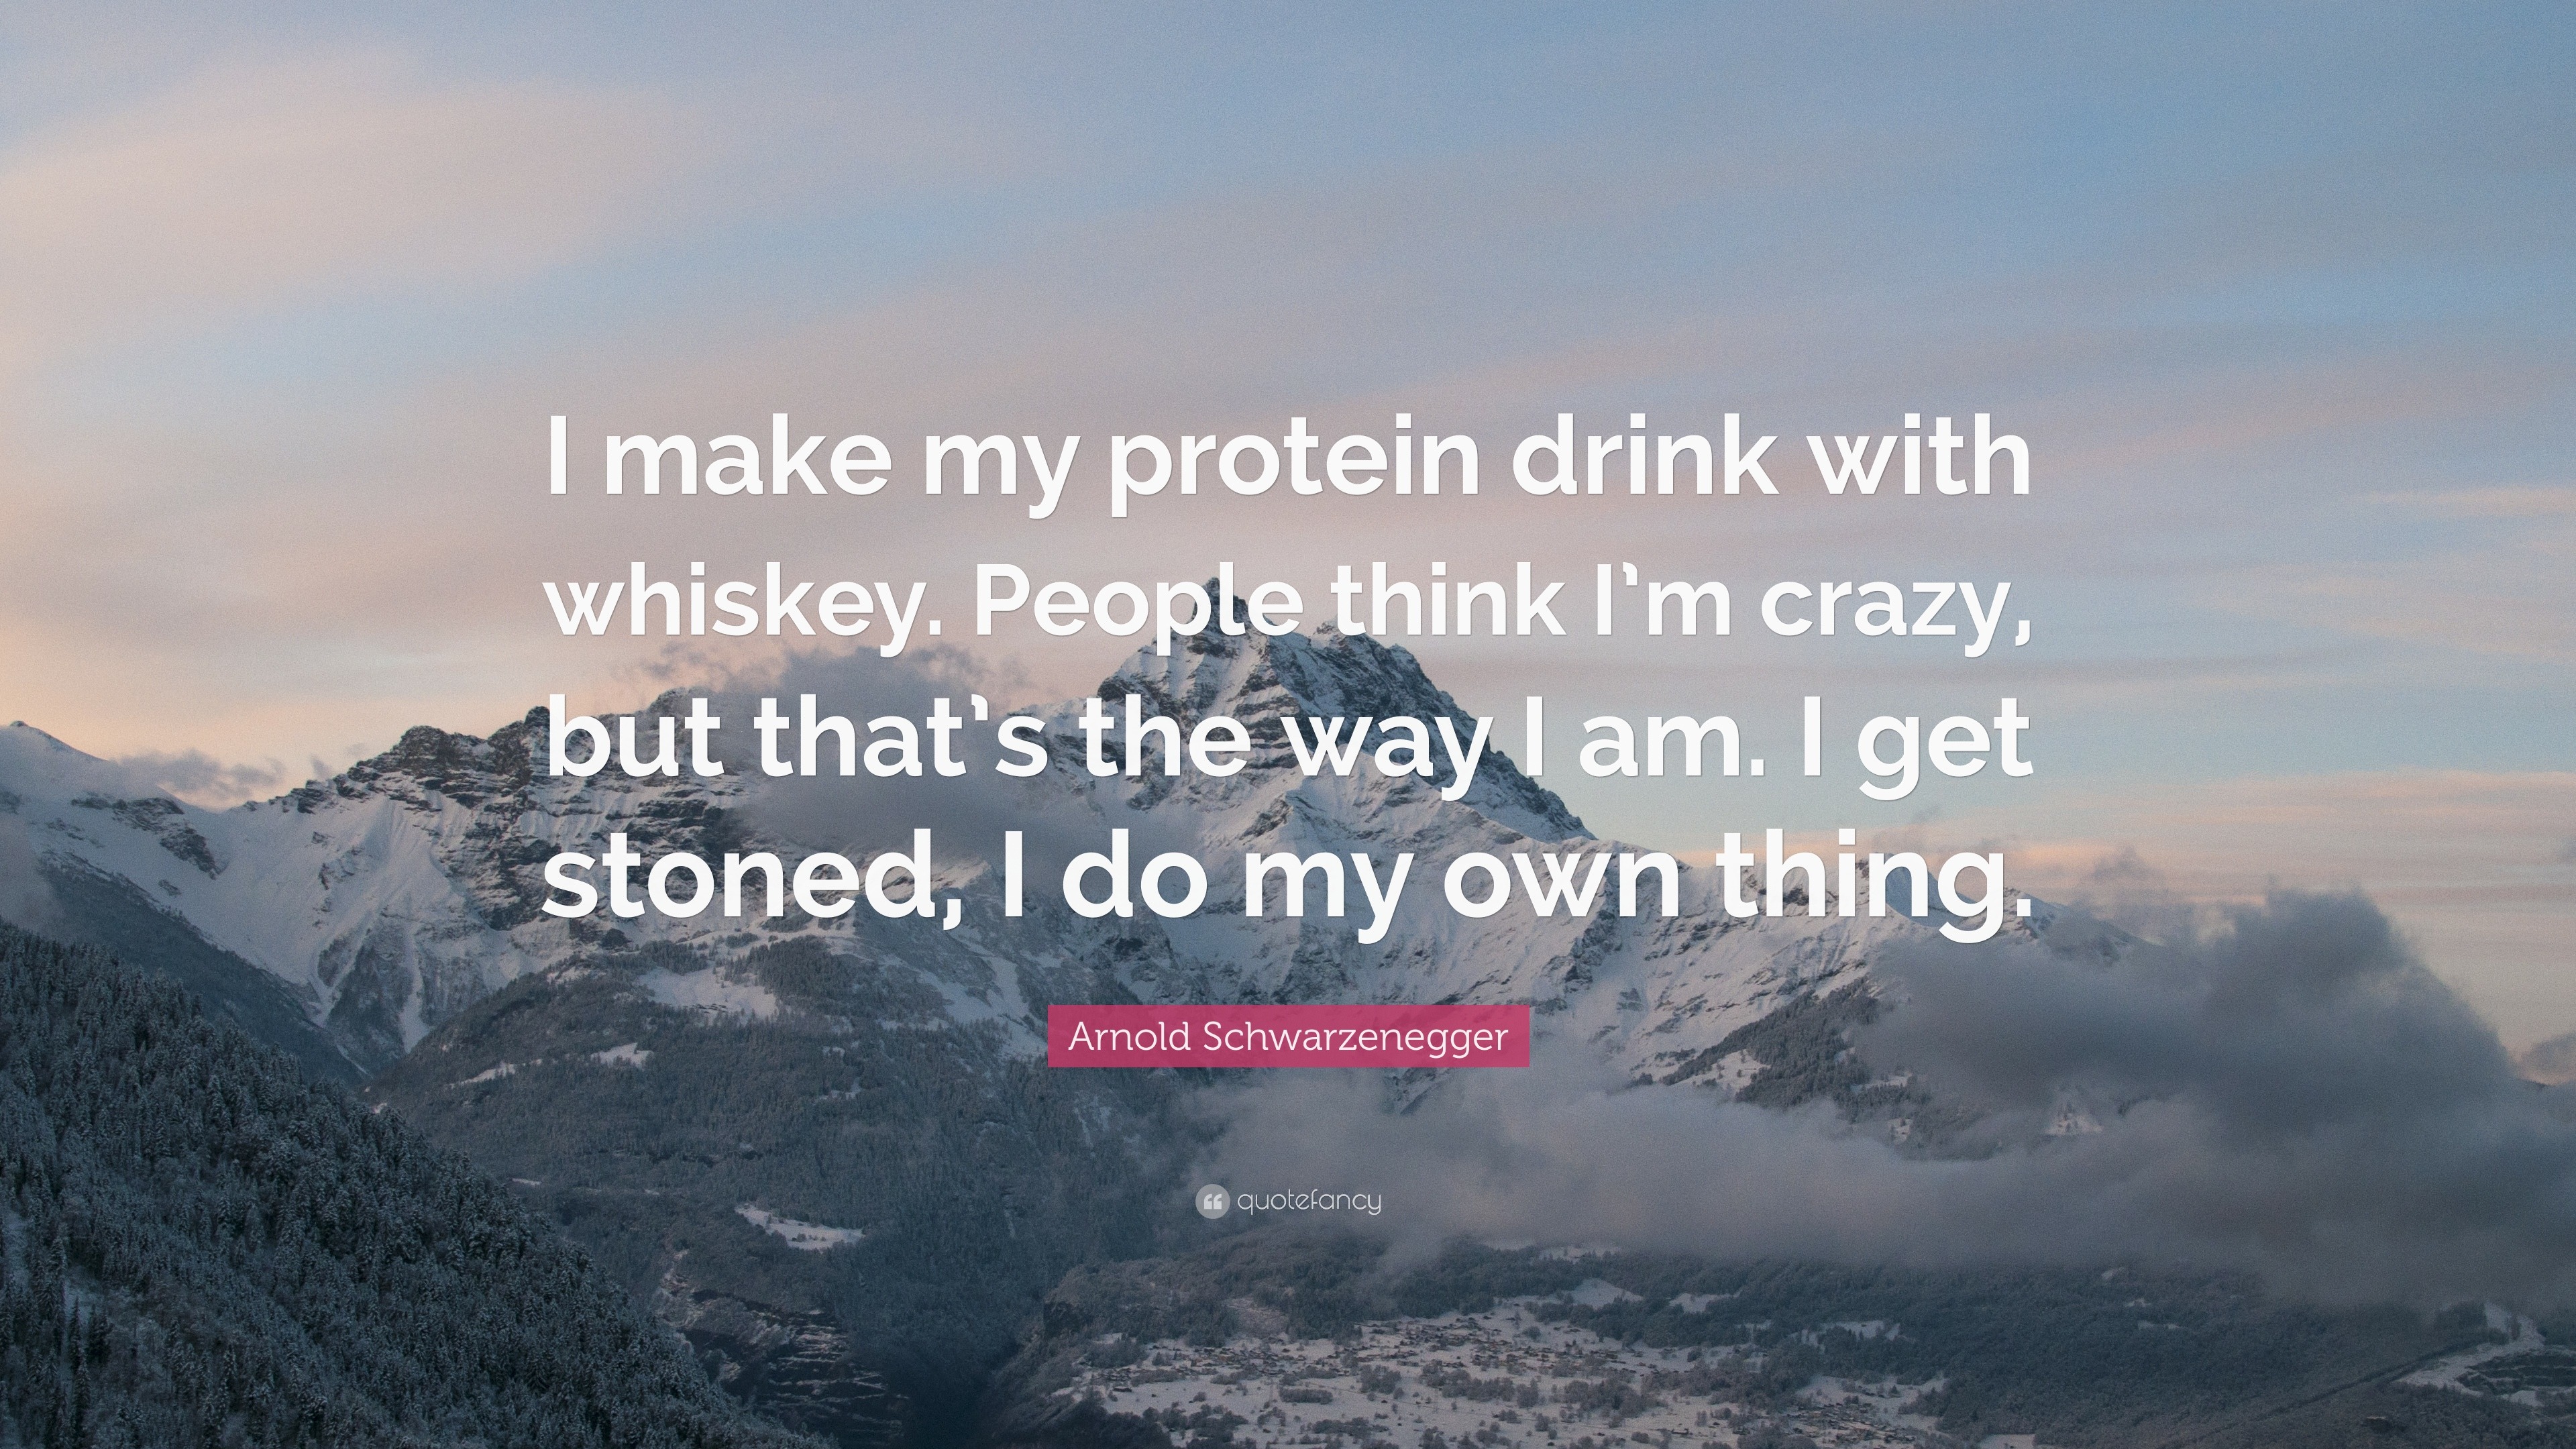 https://quotefancy.com/media/wallpaper/3840x2160/1845115-Arnold-Schwarzenegger-Quote-I-make-my-protein-drink-with-whiskey.jpg